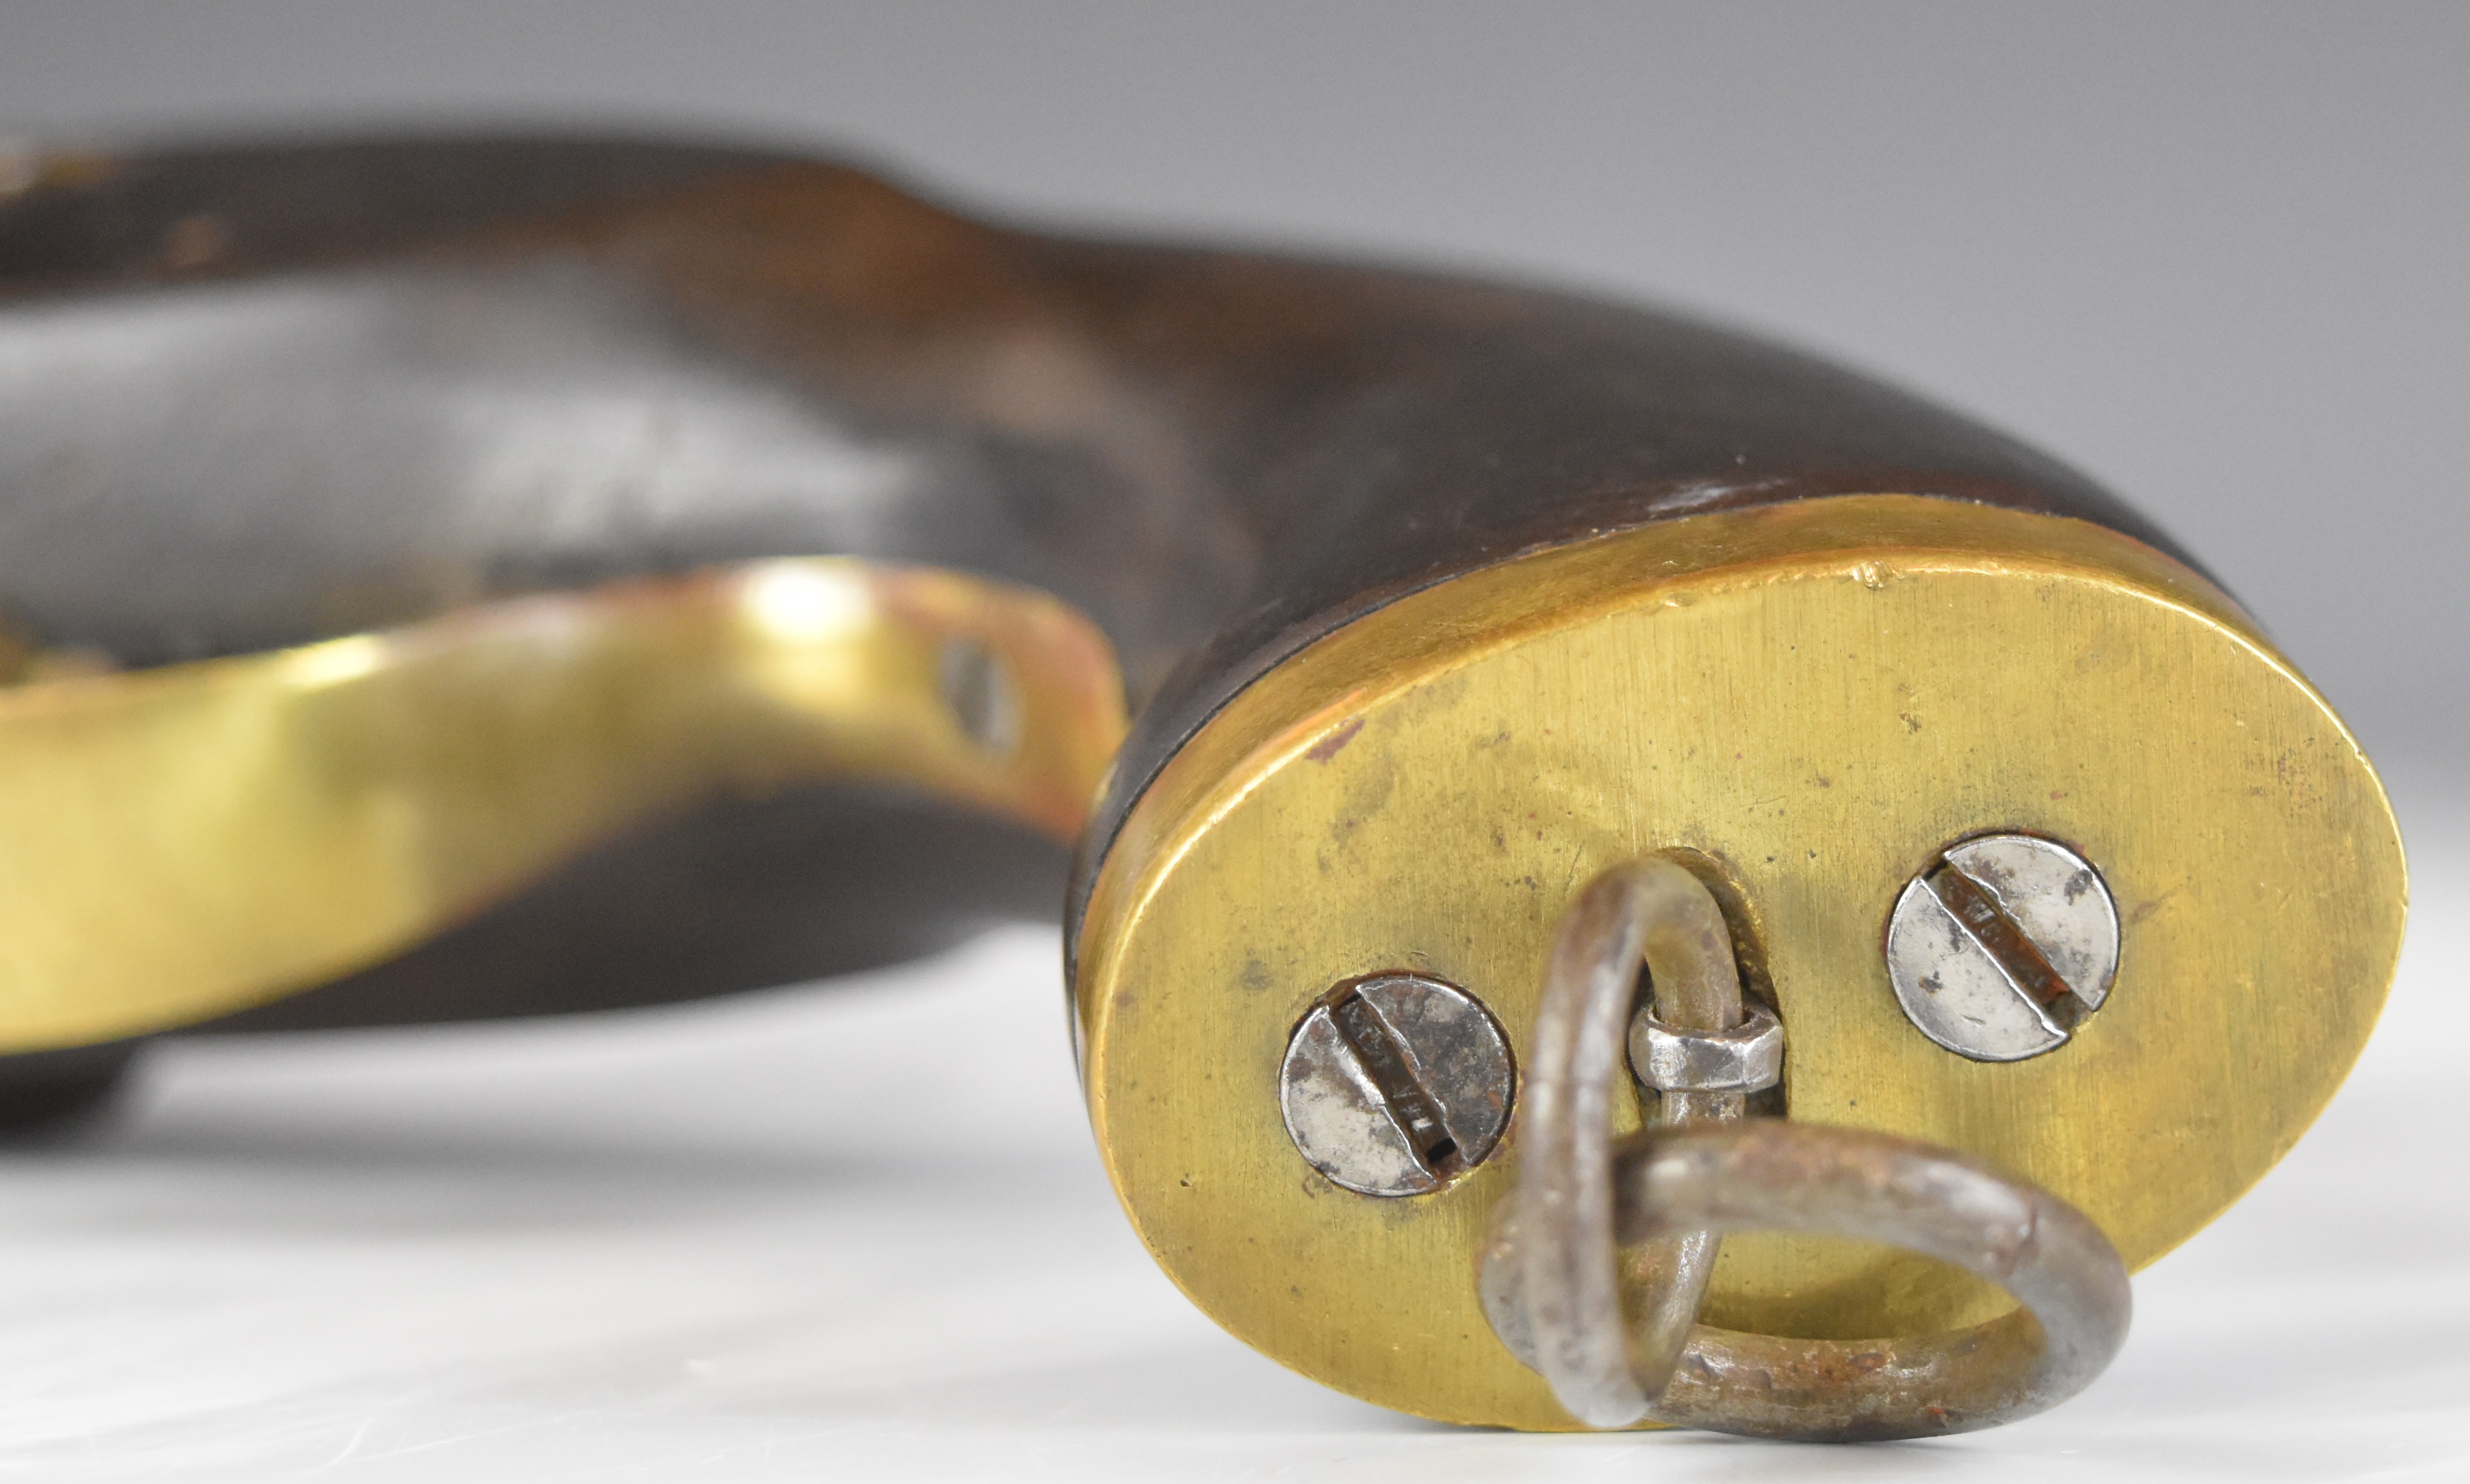 Enfield percussion hammer action sea-service pistol with lock stamped '1858 Enfield' brass trigger - Image 8 of 12